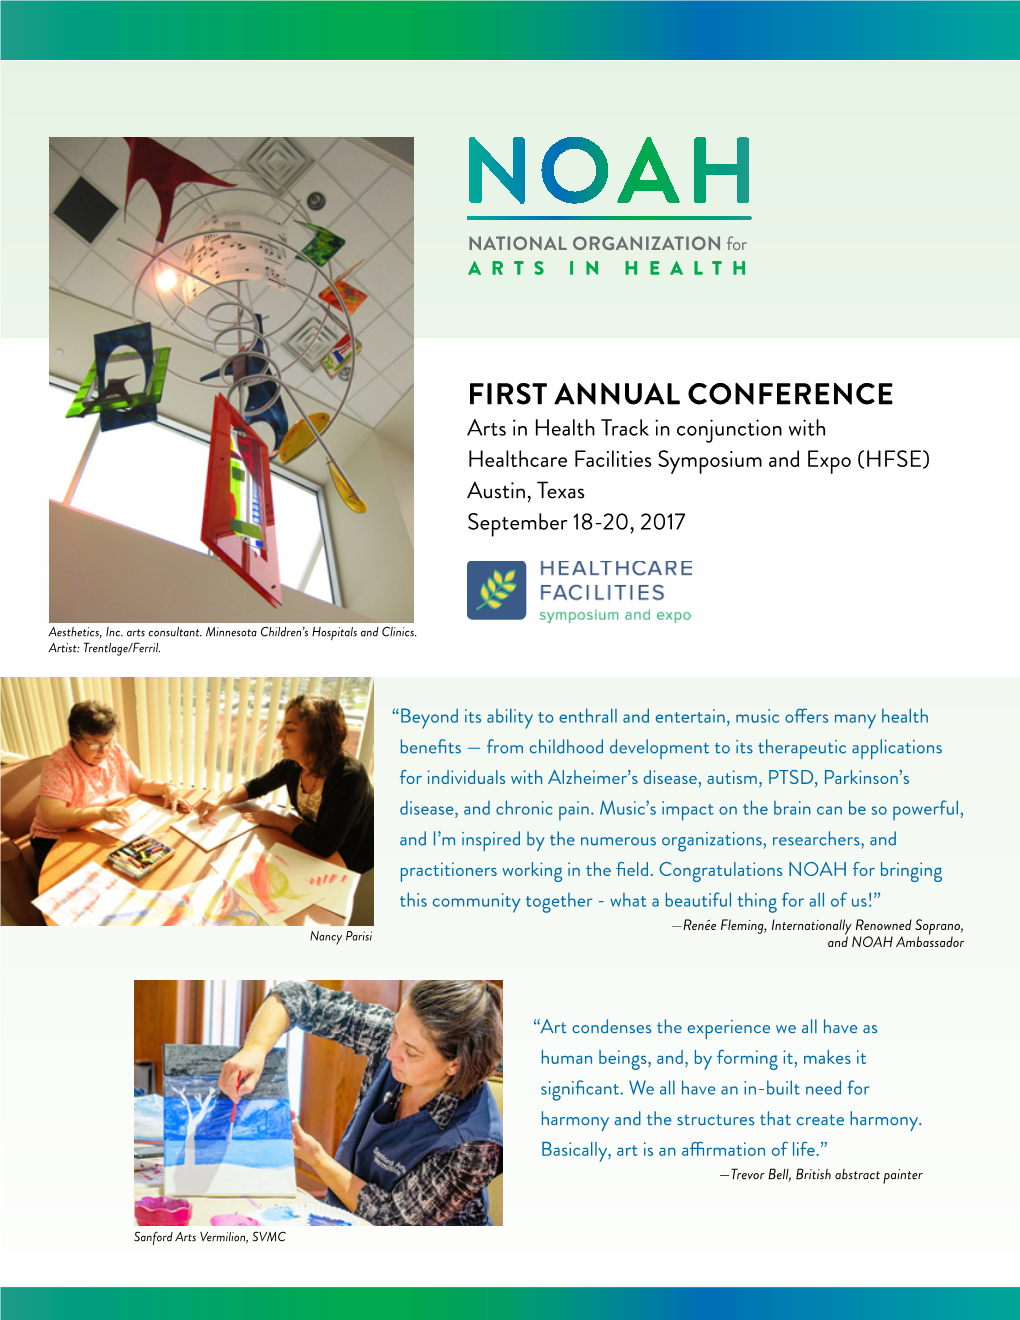 FIRST ANNUAL CONFERENCE Arts in Health Track in Conjunction with Healthcare Facilities Symposium and Expo (HFSE) Austin, Texas September 18-20, 2017